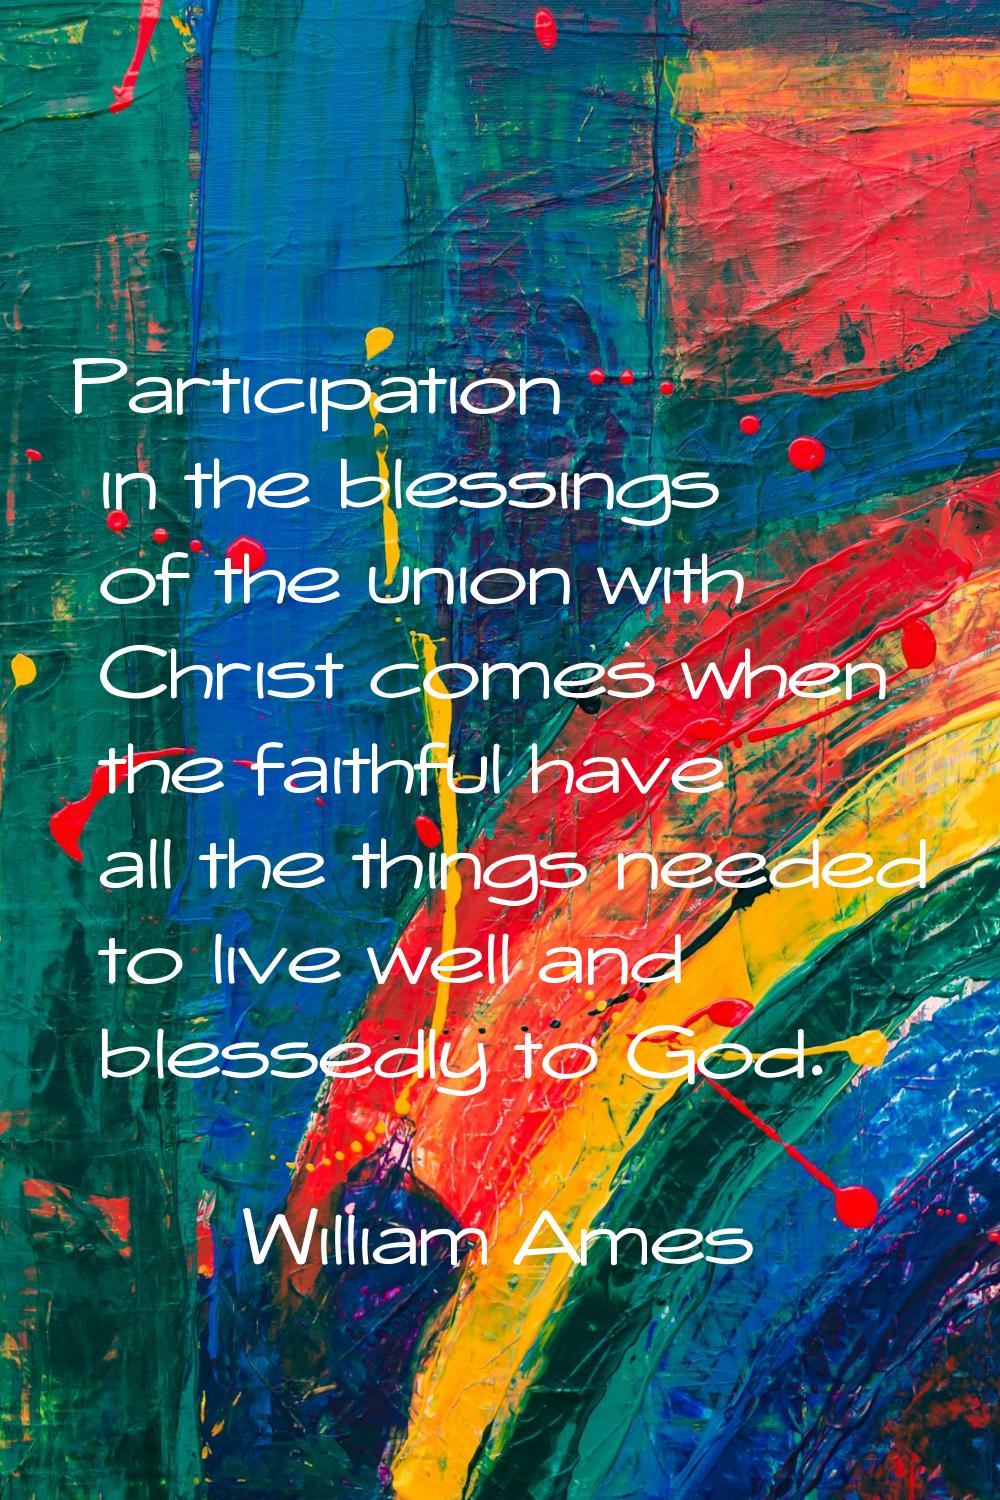 Participation in the blessings of the union with Christ comes when the faithful have all the things